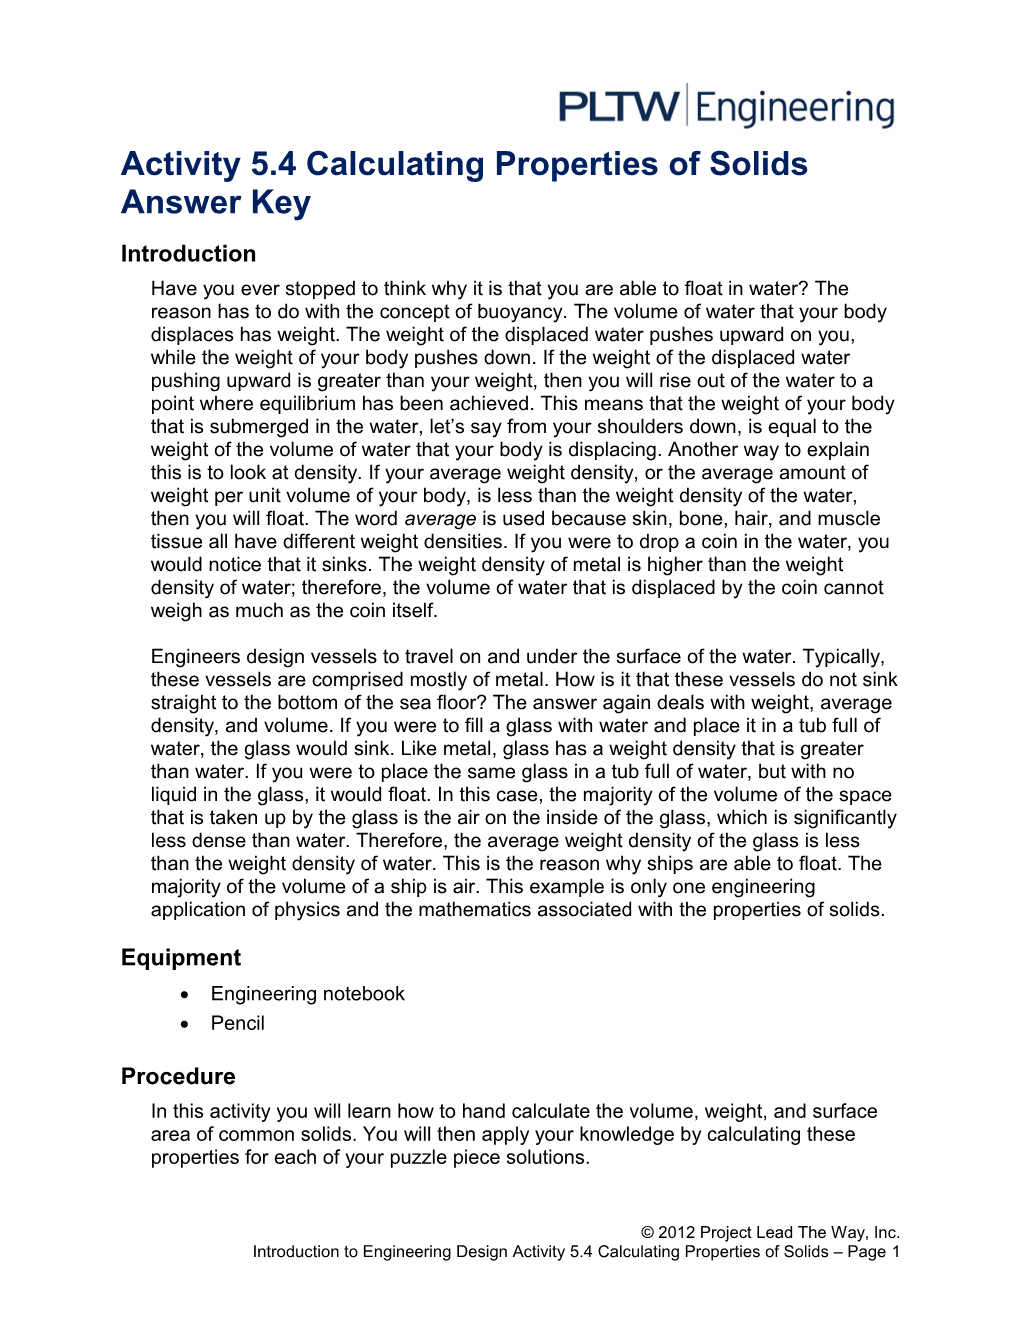 Activity 5.4 Calculating Properties of Solids Answer Key